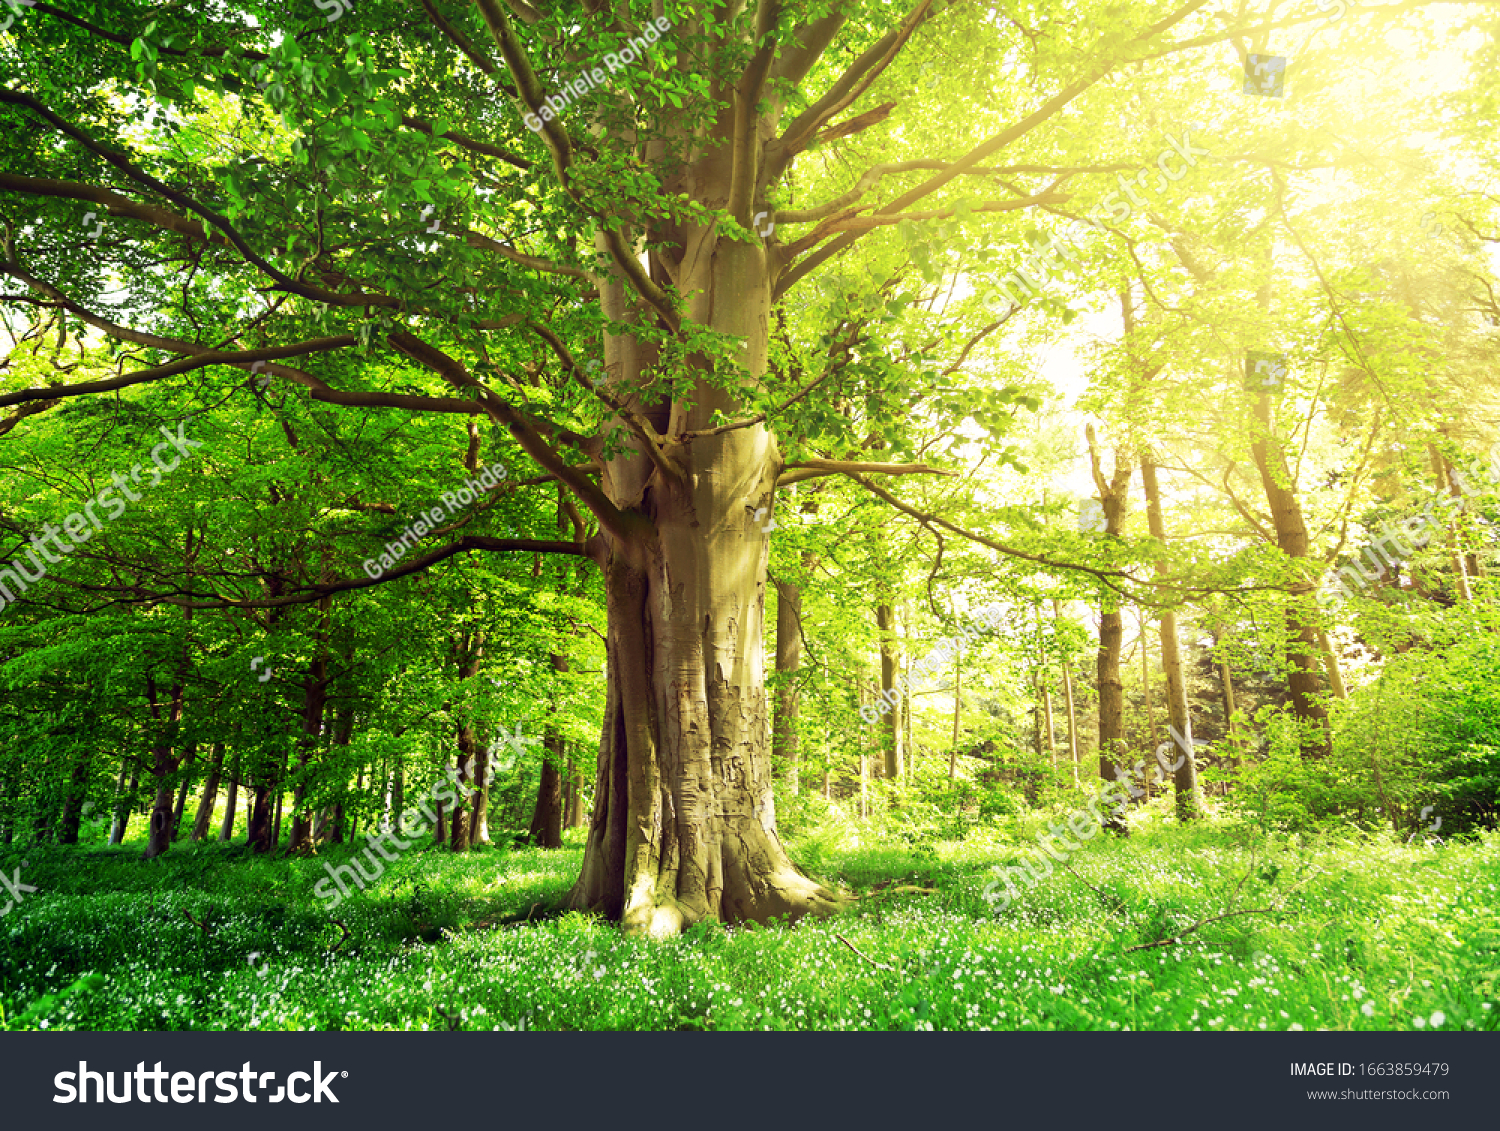 Beech forest with a old tree in the sunlight #1663859479